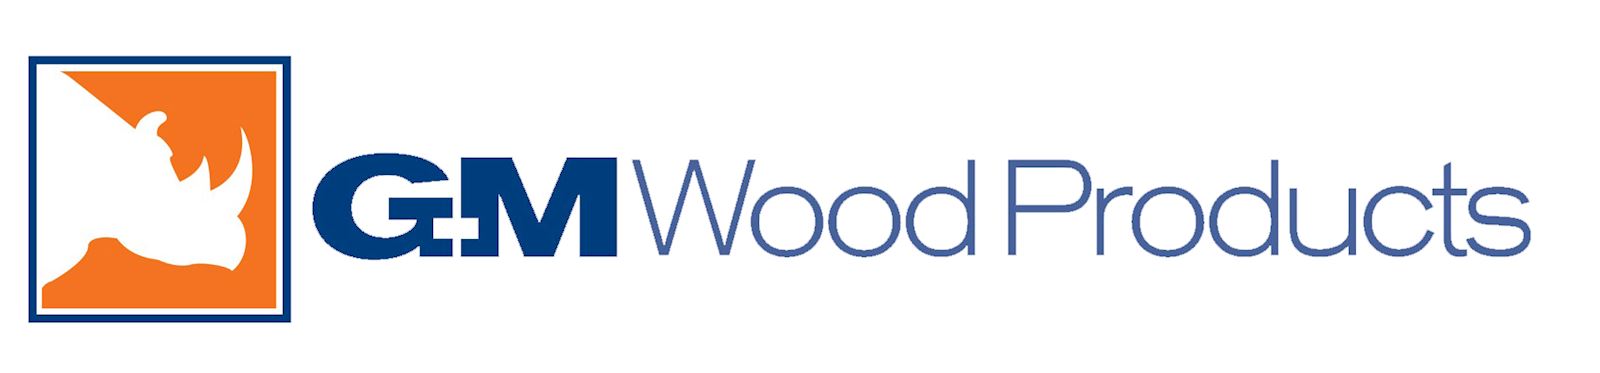 GM Wood Products